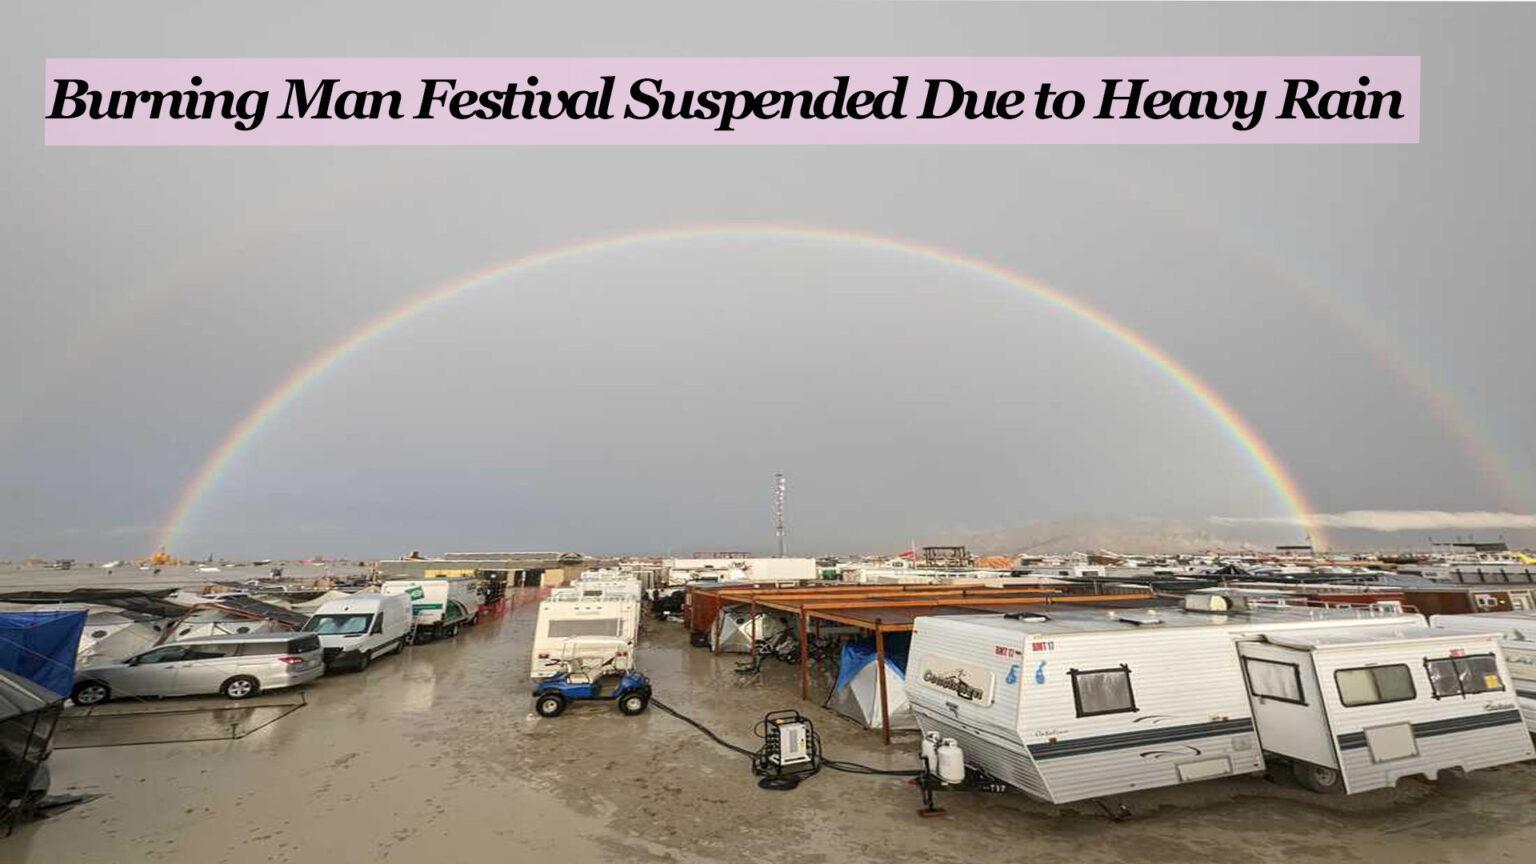 Burning Man Festival Suspended Due to Heavy Rain: Impact and Updates